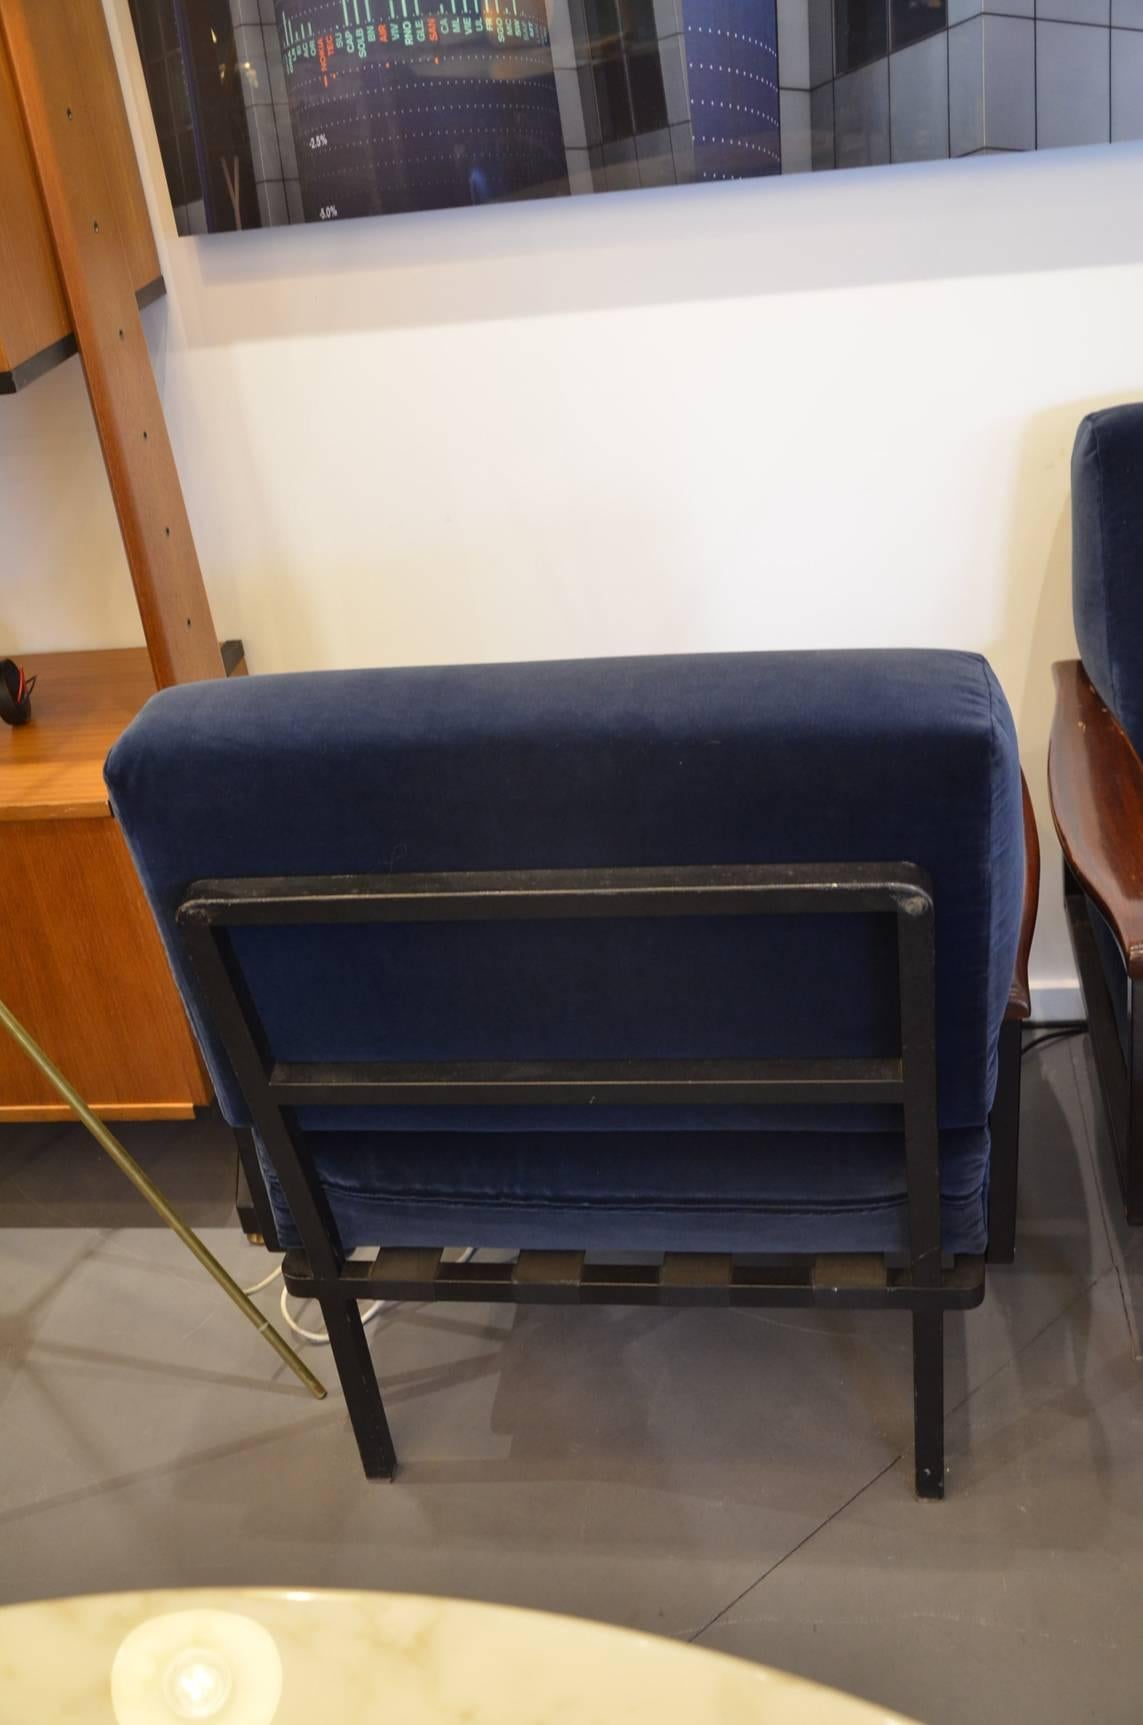 Reupholstered in a blue velvet fabric
good condition.